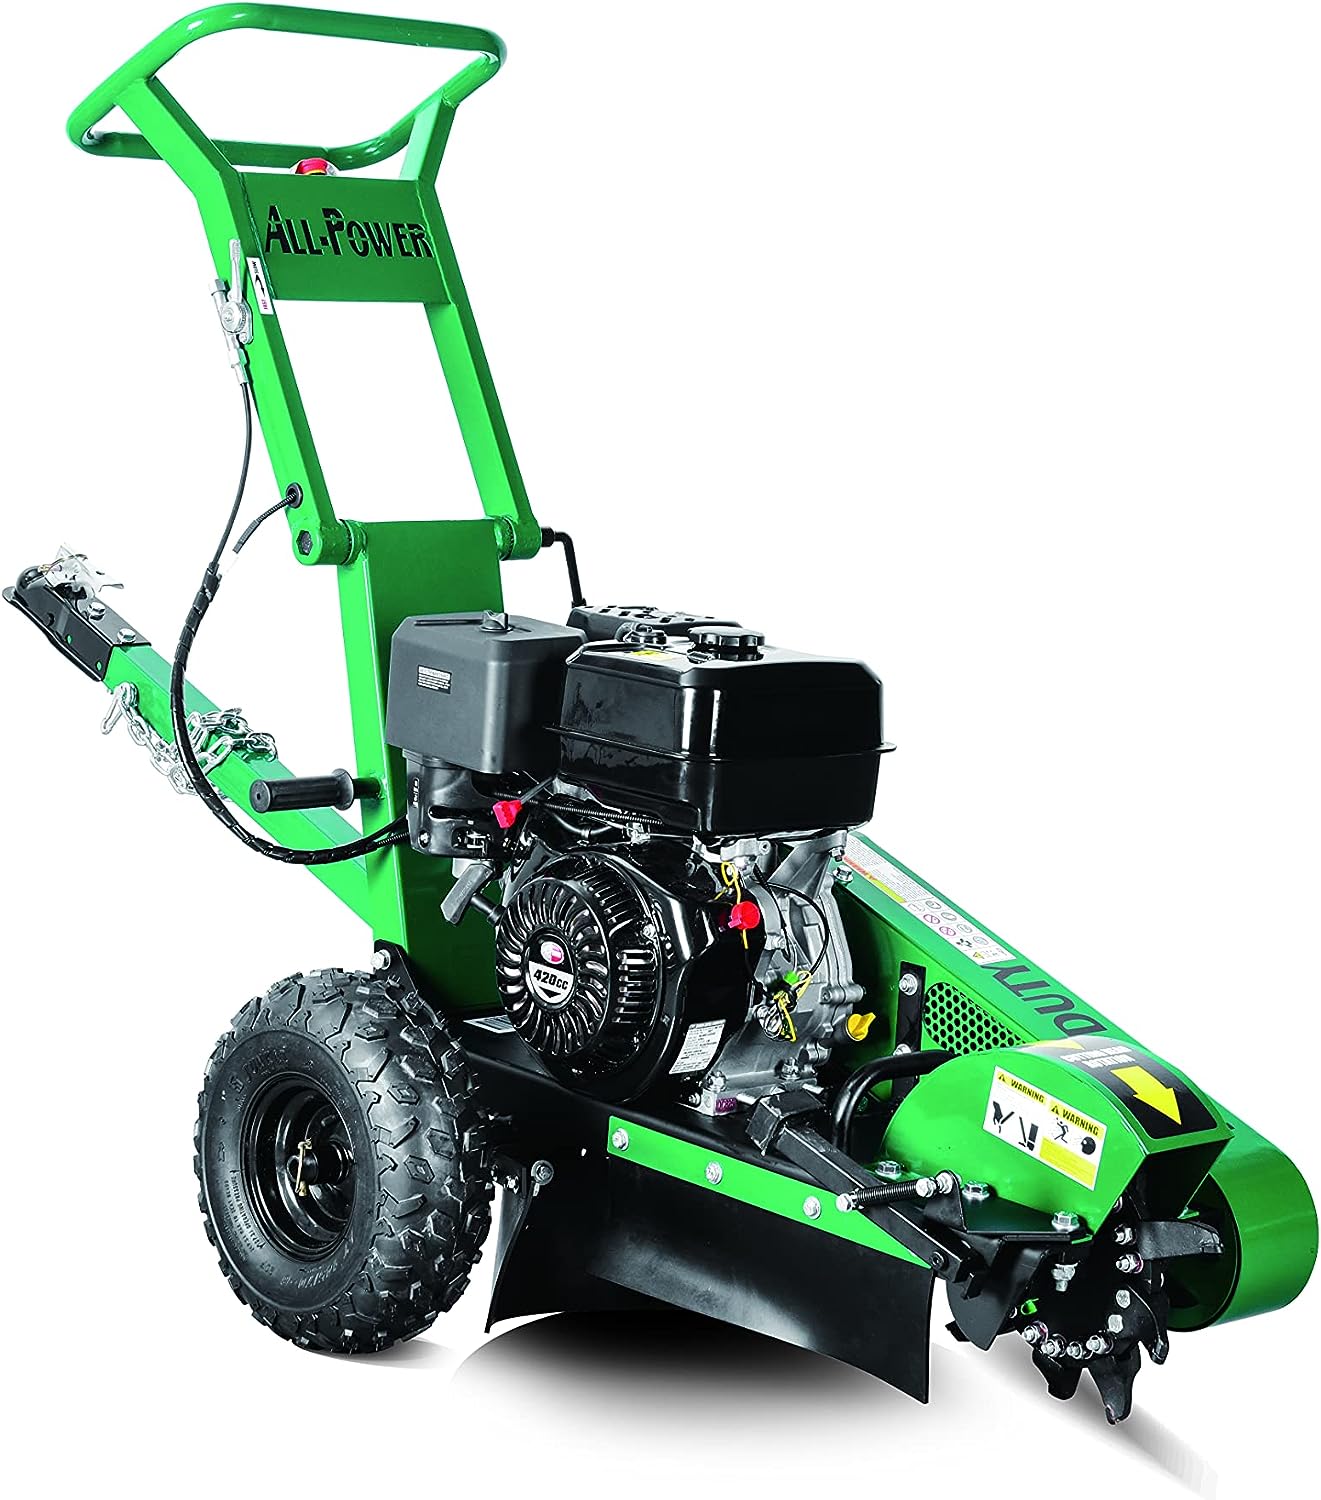 All Power, Stump Grinder for Tree Stump Removal with 12" Blades - $1,150